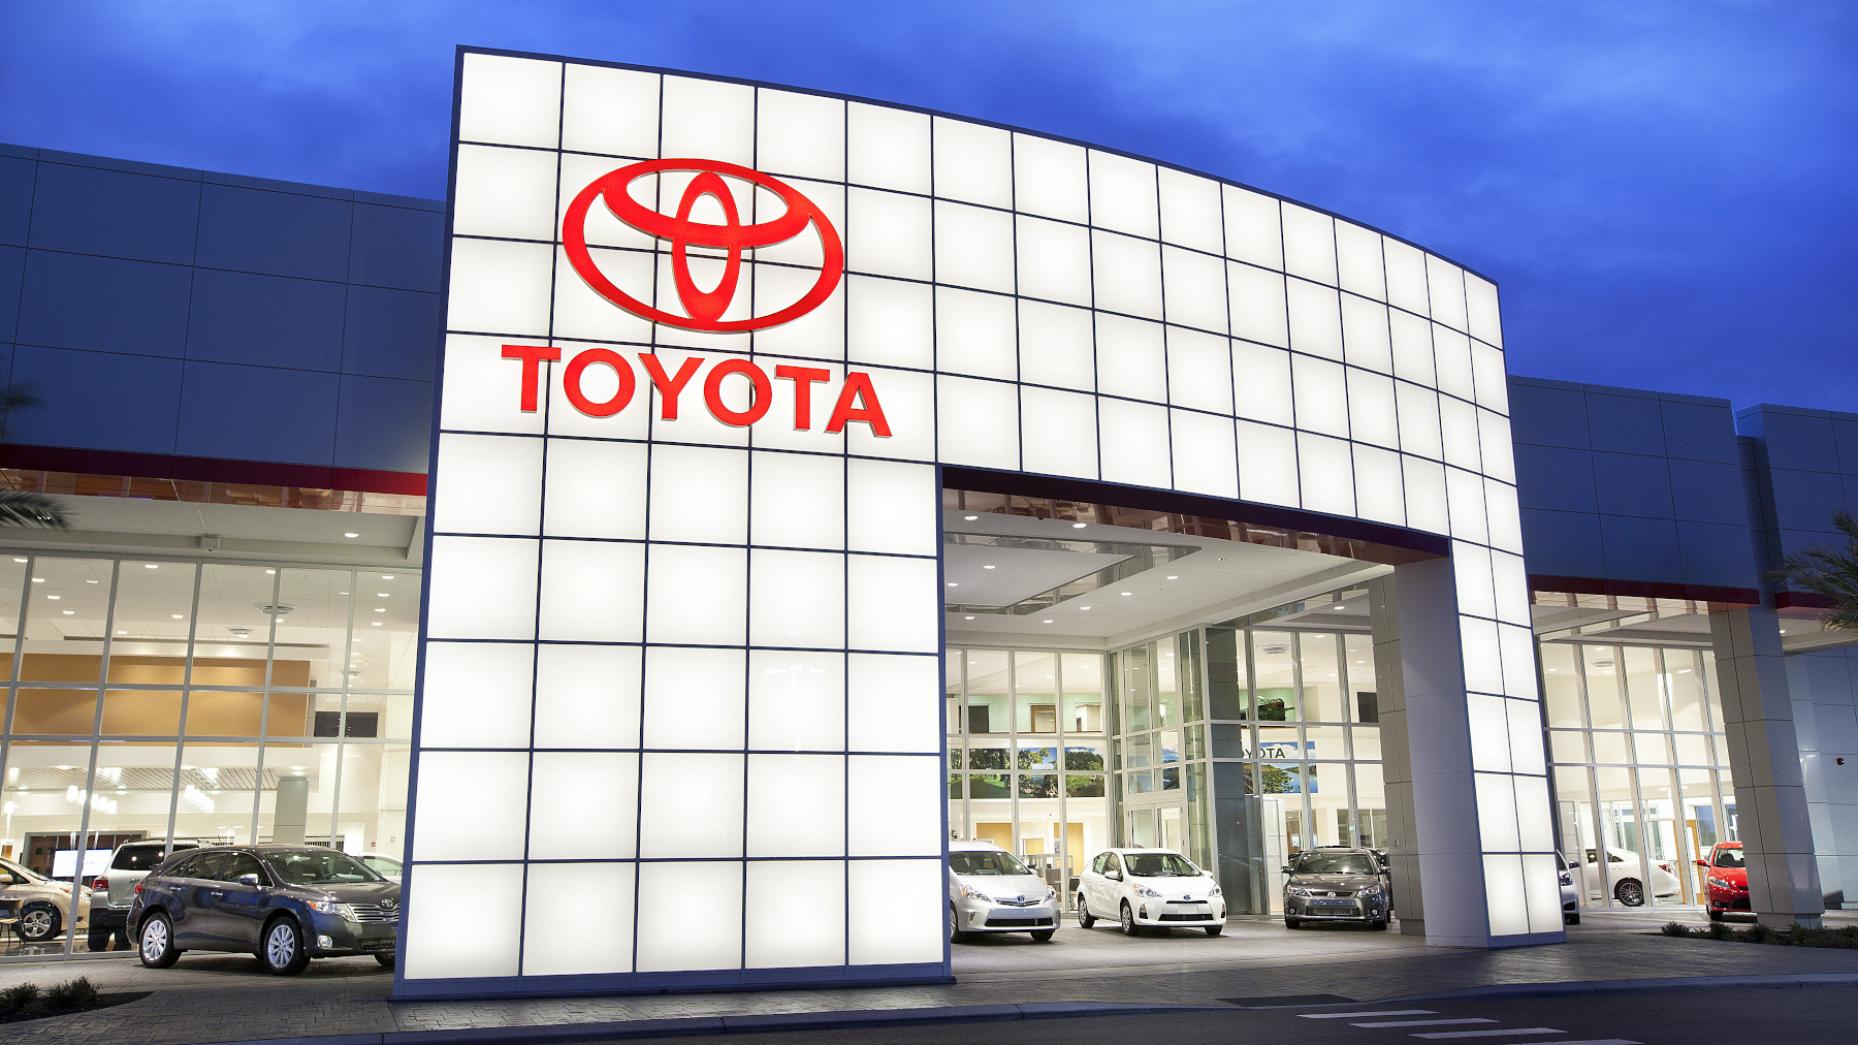 What’s been Toyota’s worst moment?